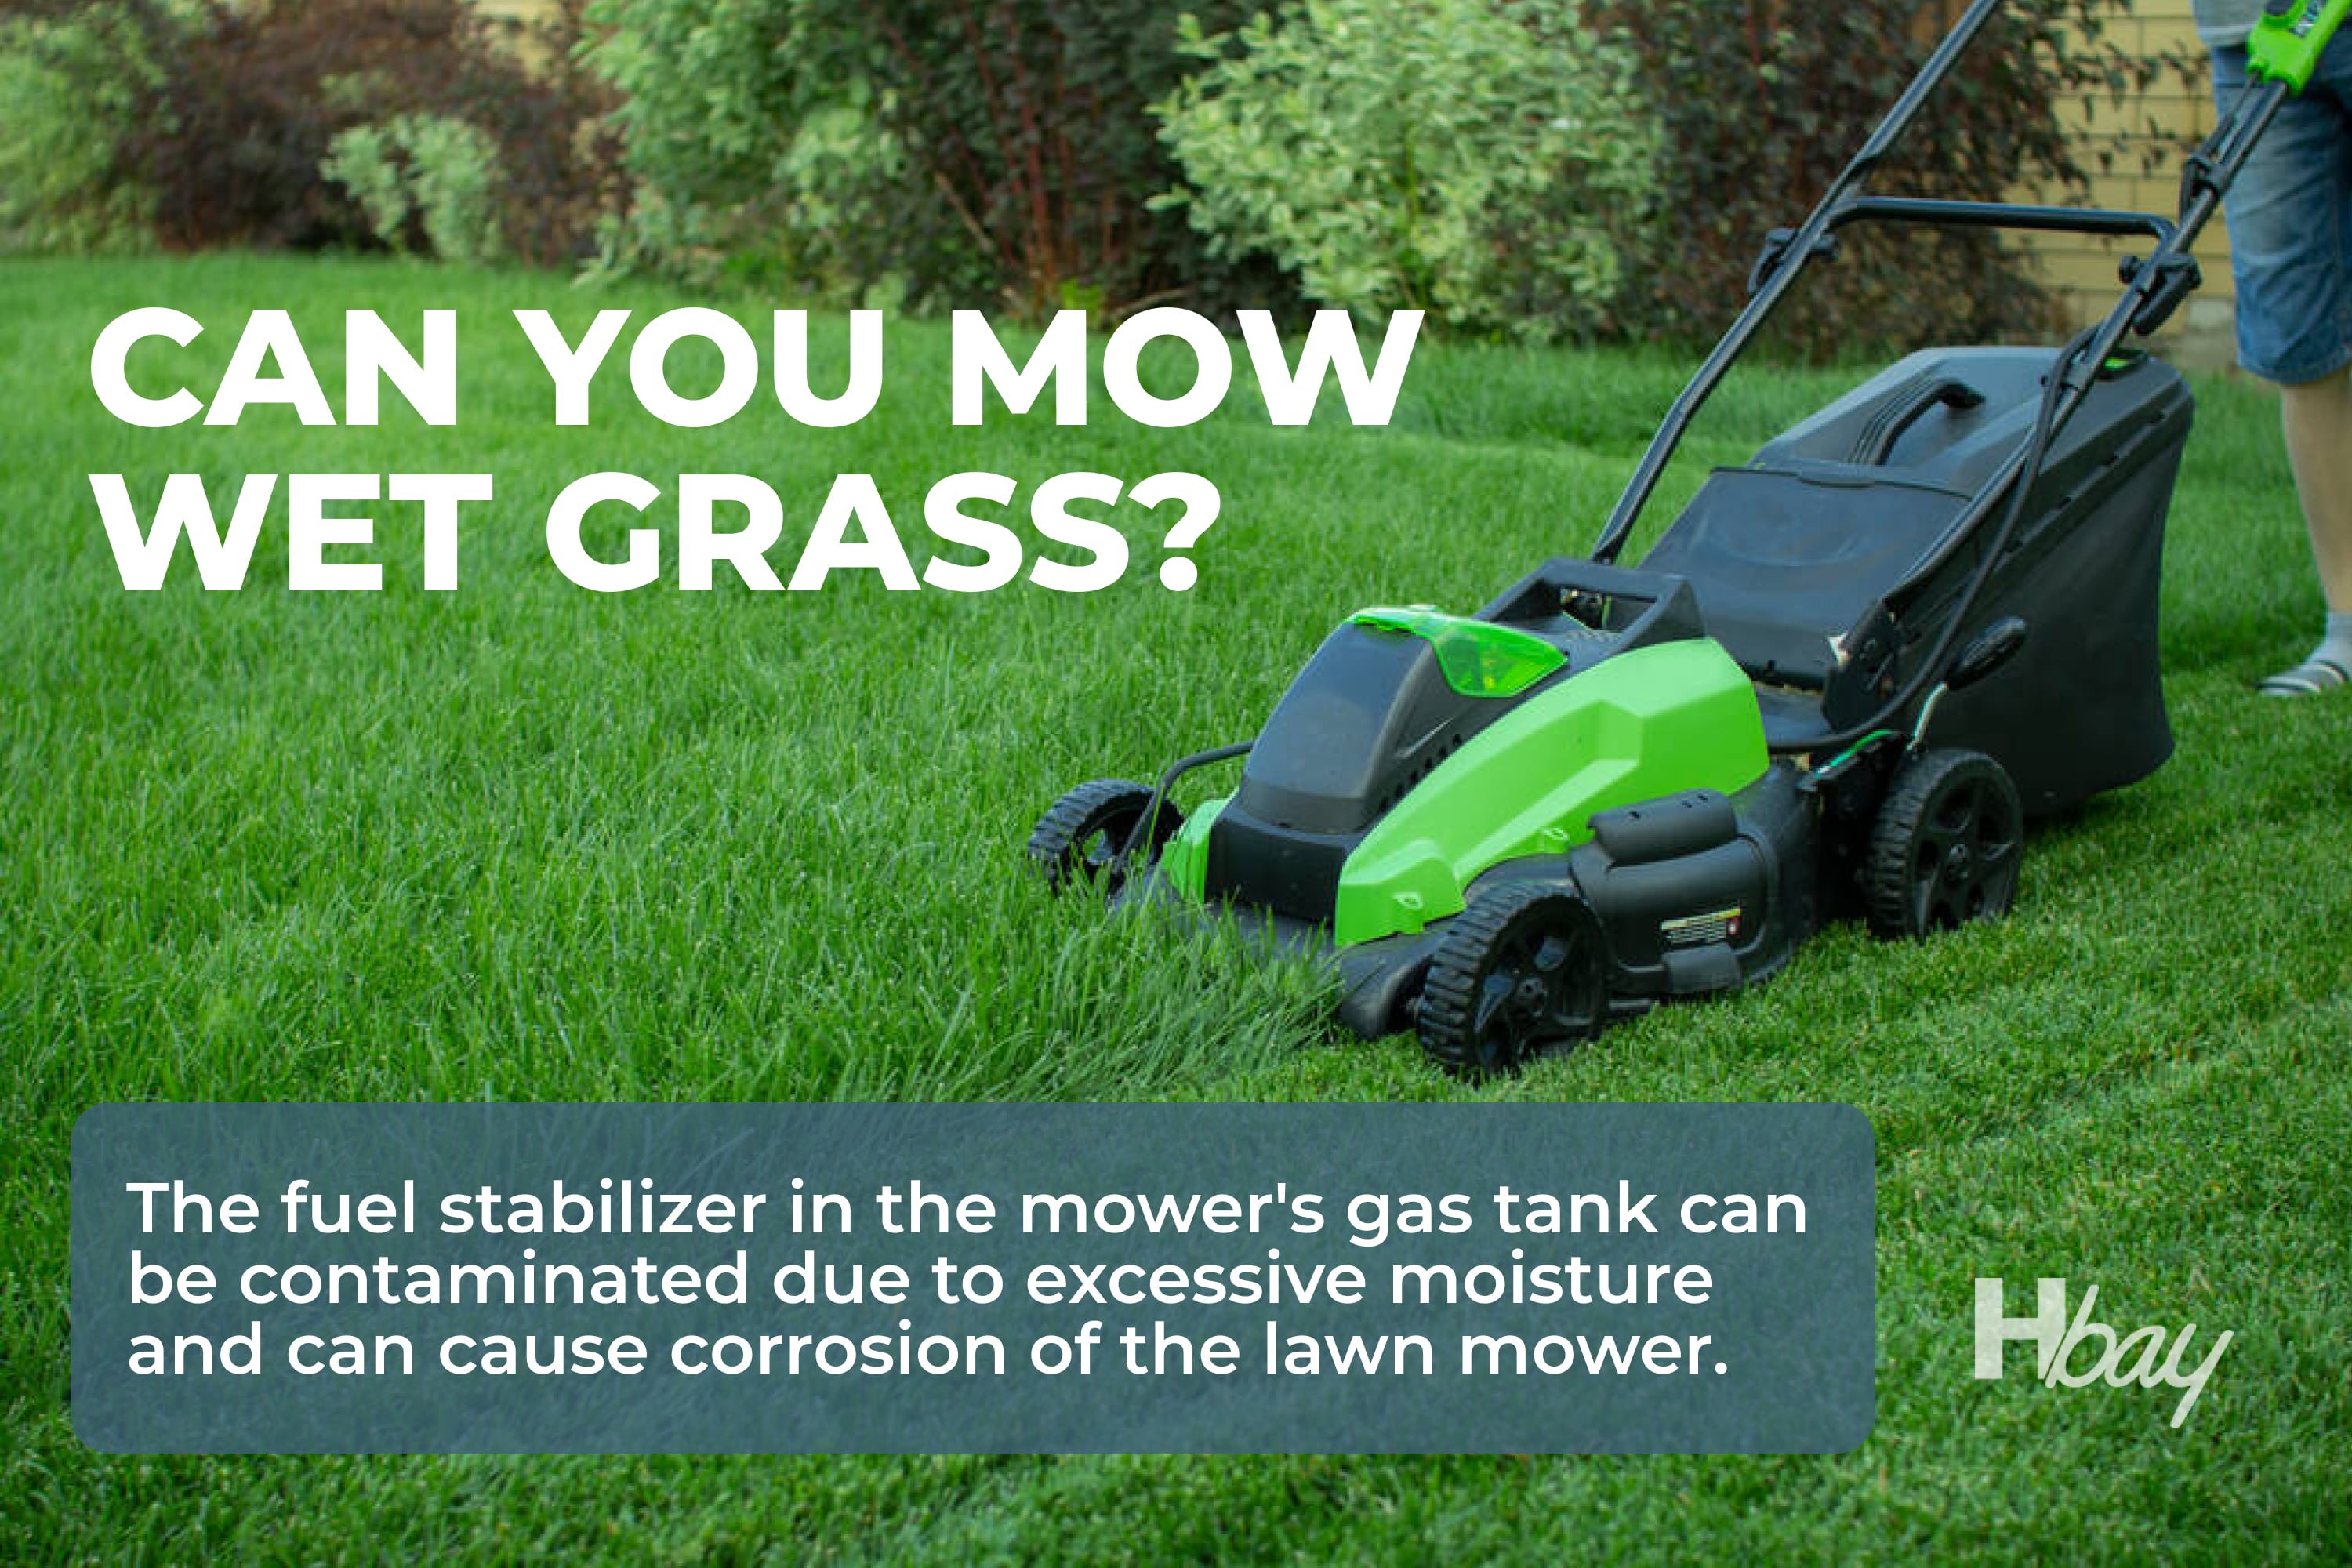 Can You Cut Grass After It Rains